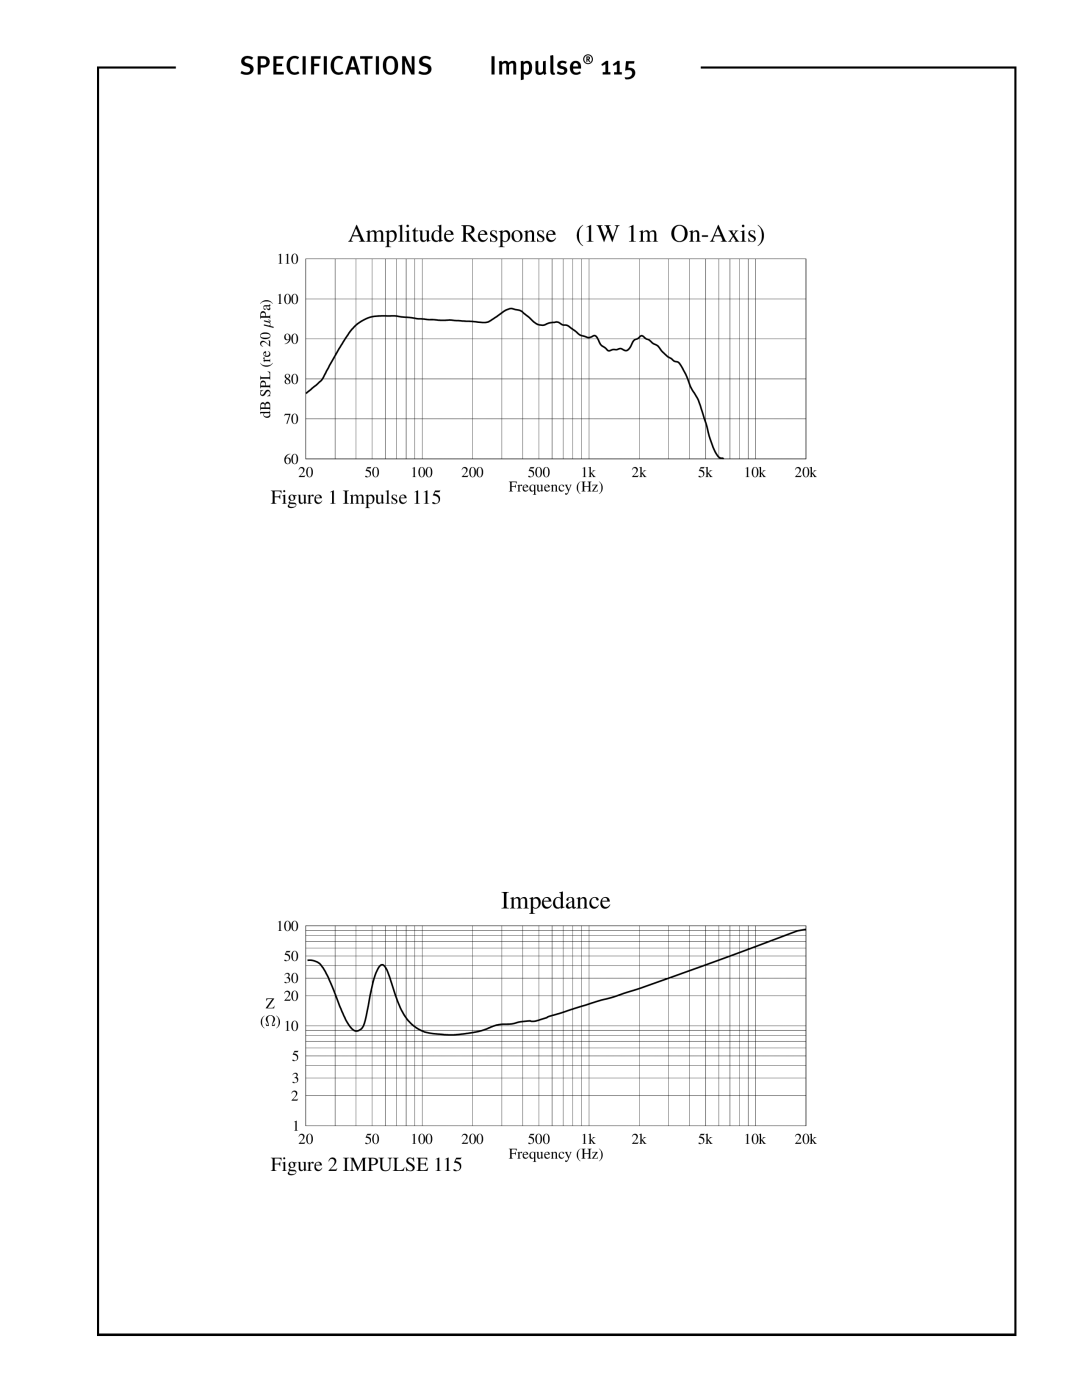 Peavey Impulse 115 specifications Amplitude Response, 1W 1m On-Axis, Impedance, Specifications 